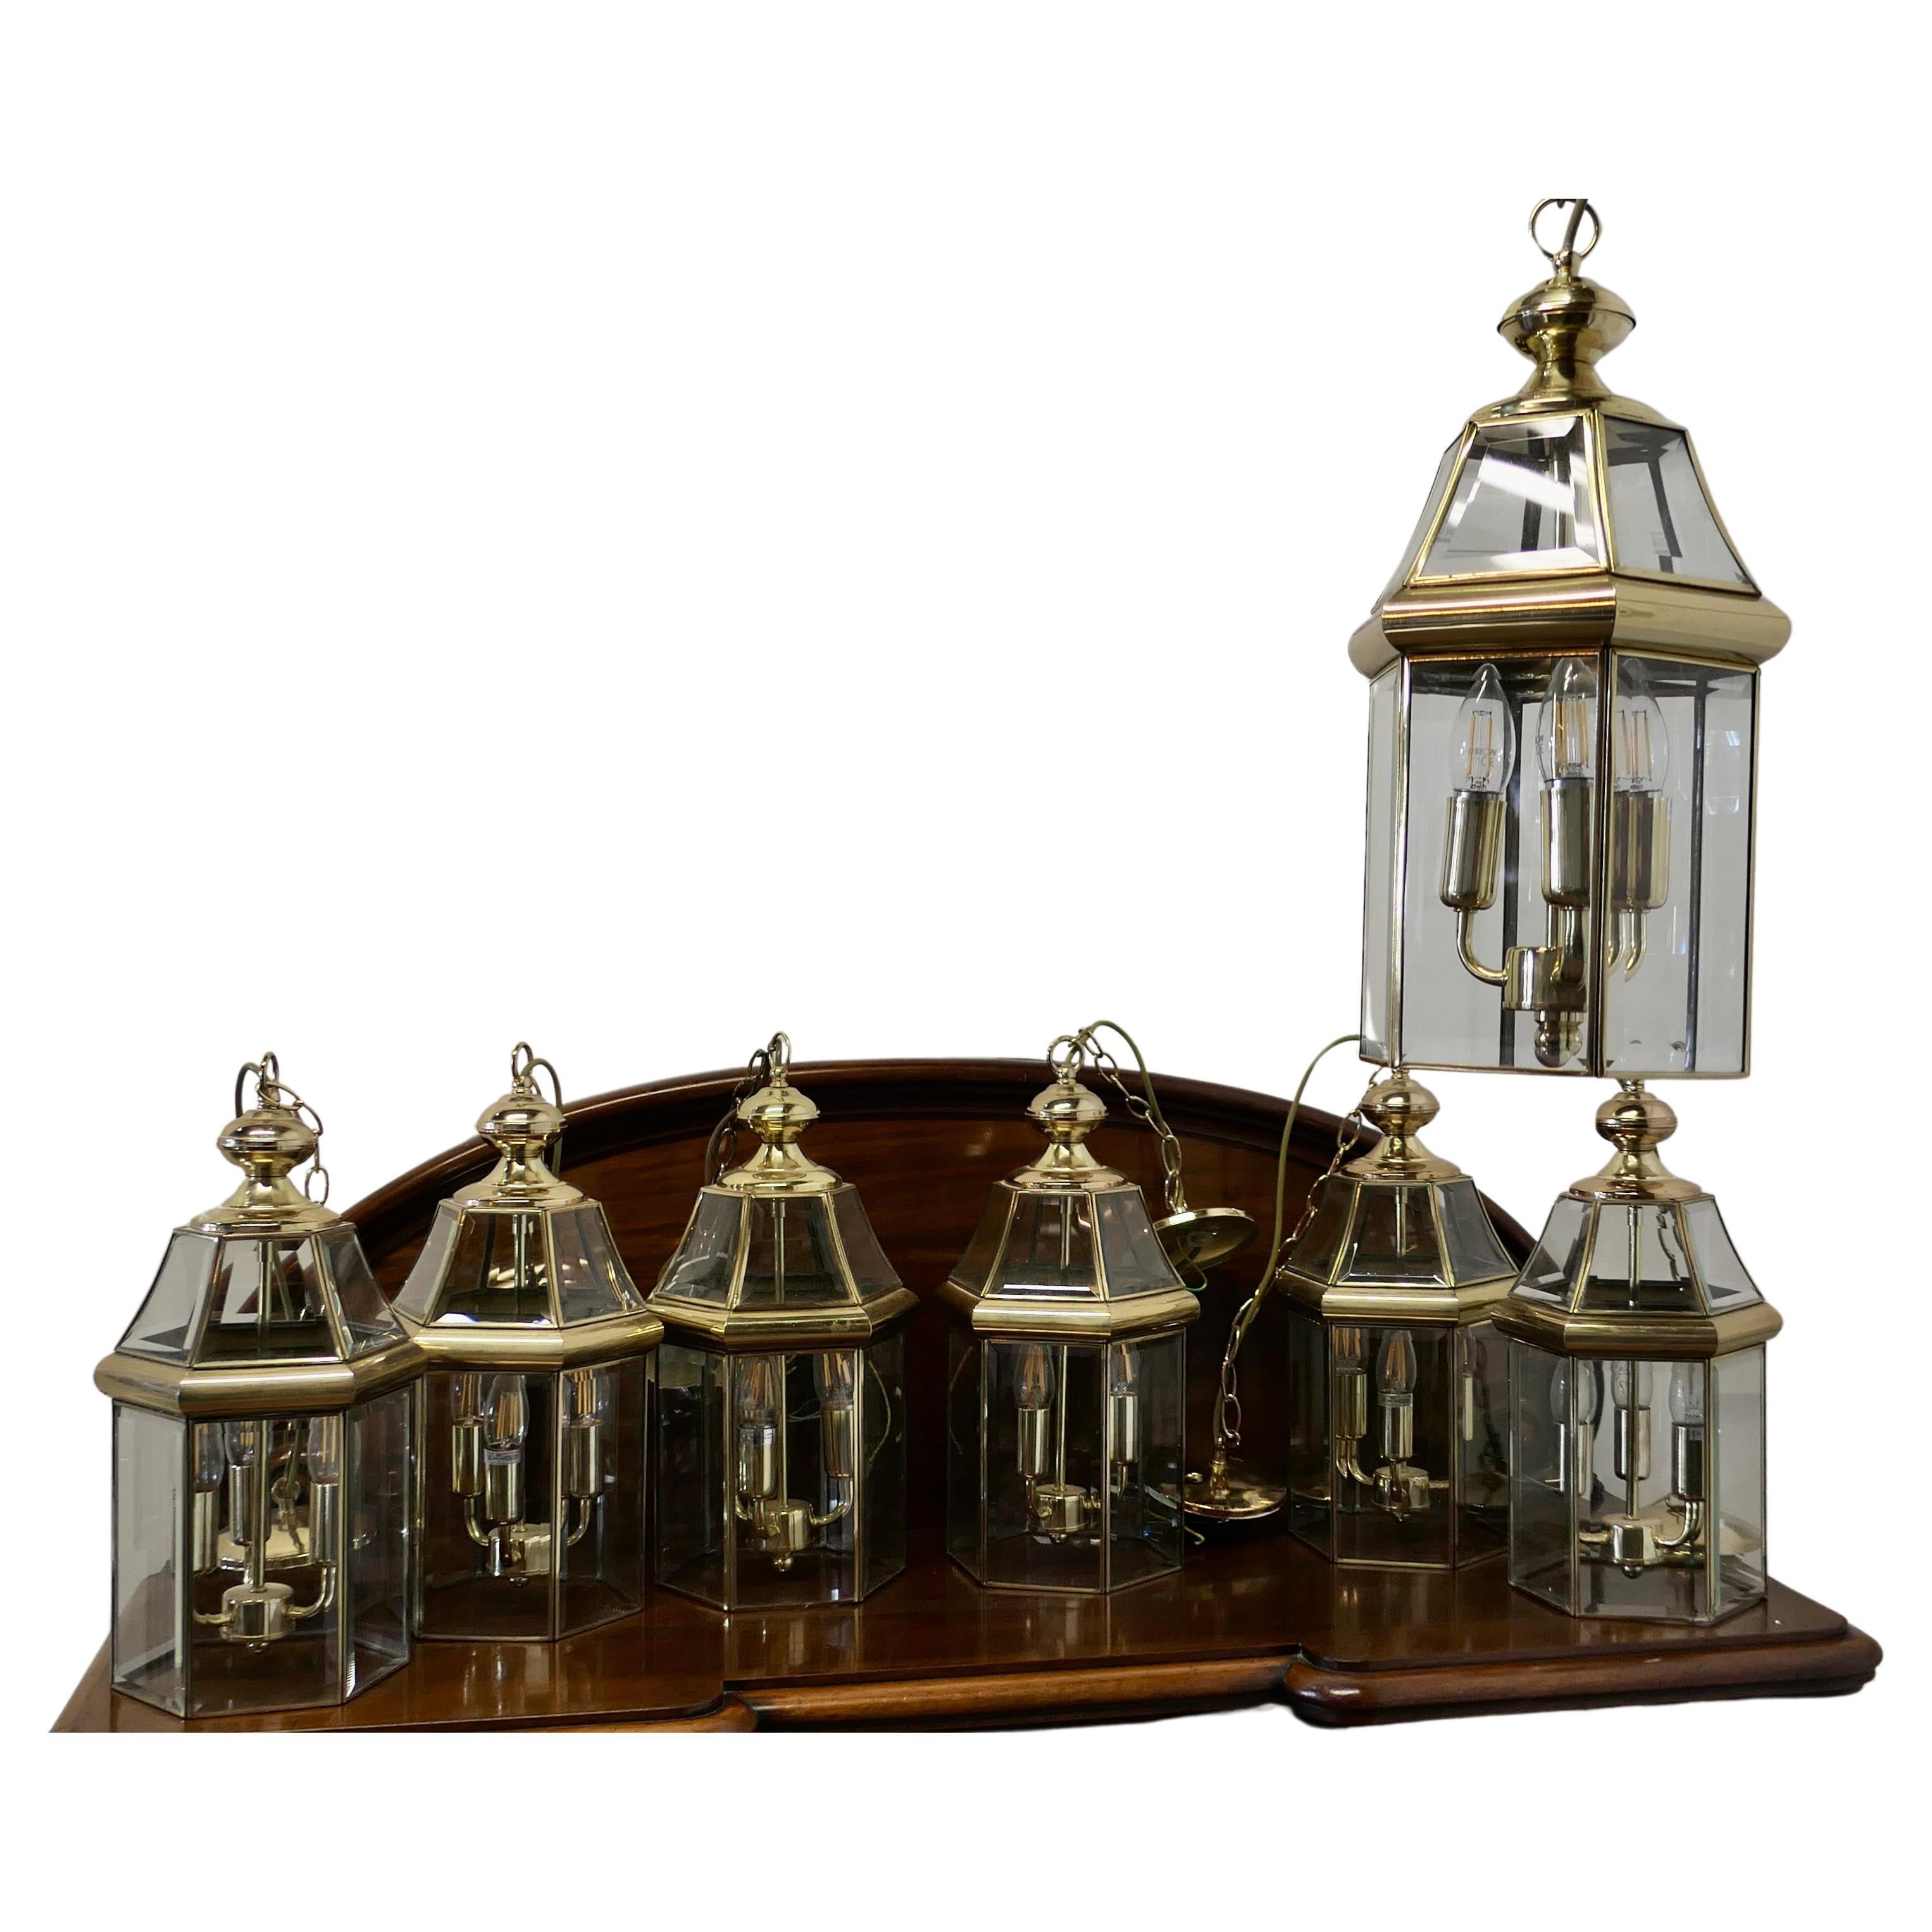  7 Art Deco Style Brass & Glass Hall Lanterns

A superb impressive set of brass lanterns, these have 6 clear glass sides set with bevelled cut glass there are 3 bulb holders inside of each one, they each hang on a brass chain and ceiling rose
The